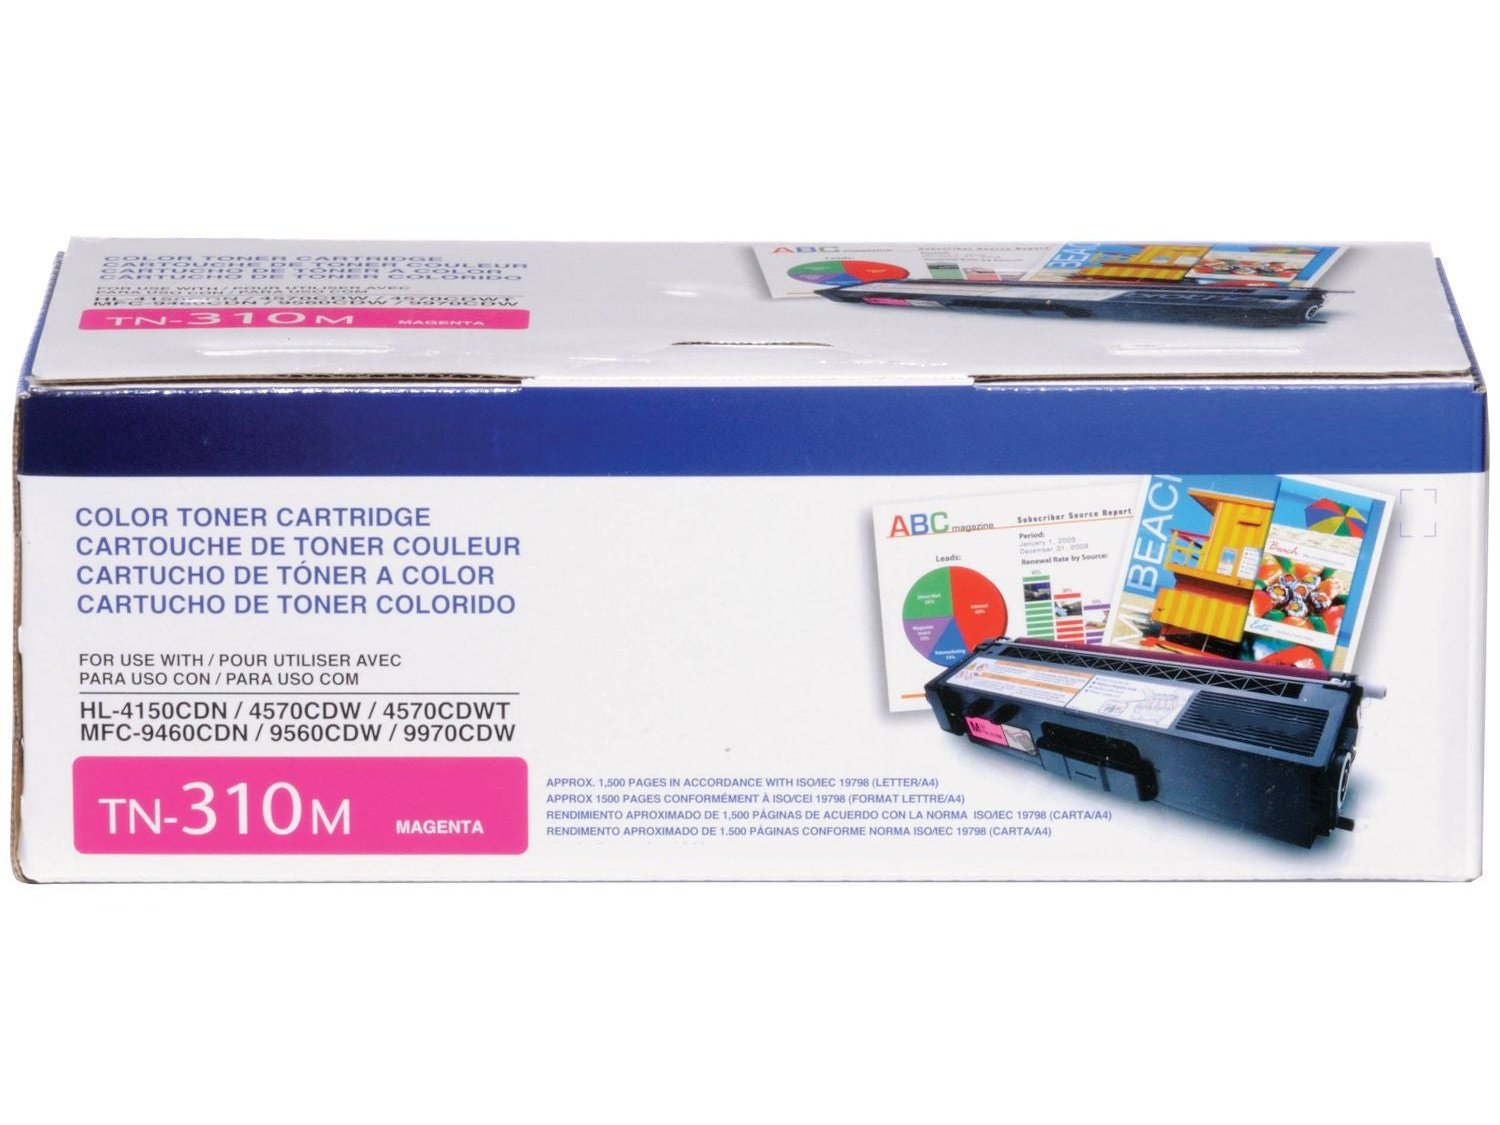 ICU Compatible/ OEM Get Brother ICU-TN-310-M Yields 3500 Pages TN-310 Magenta High Yield 3500 Pages Toner Cartridge (TN310M) - Ink Cartridges USA